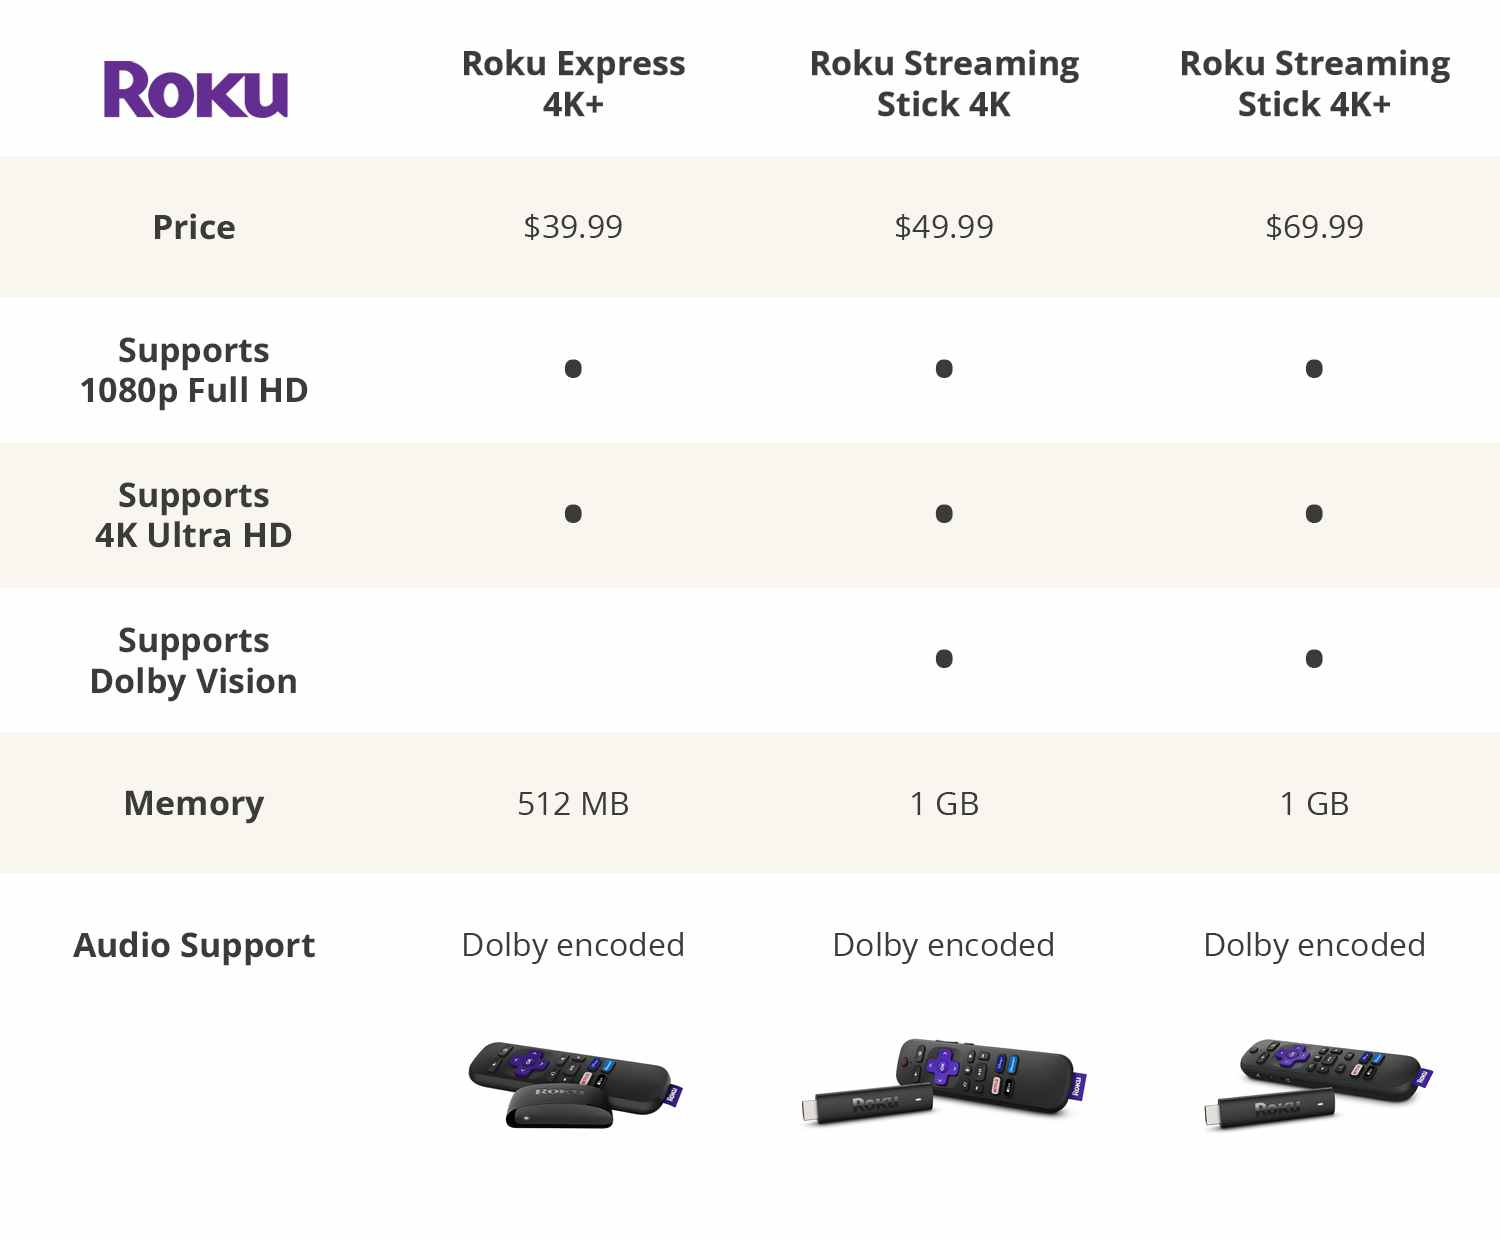 Roku streaming product comparison guide